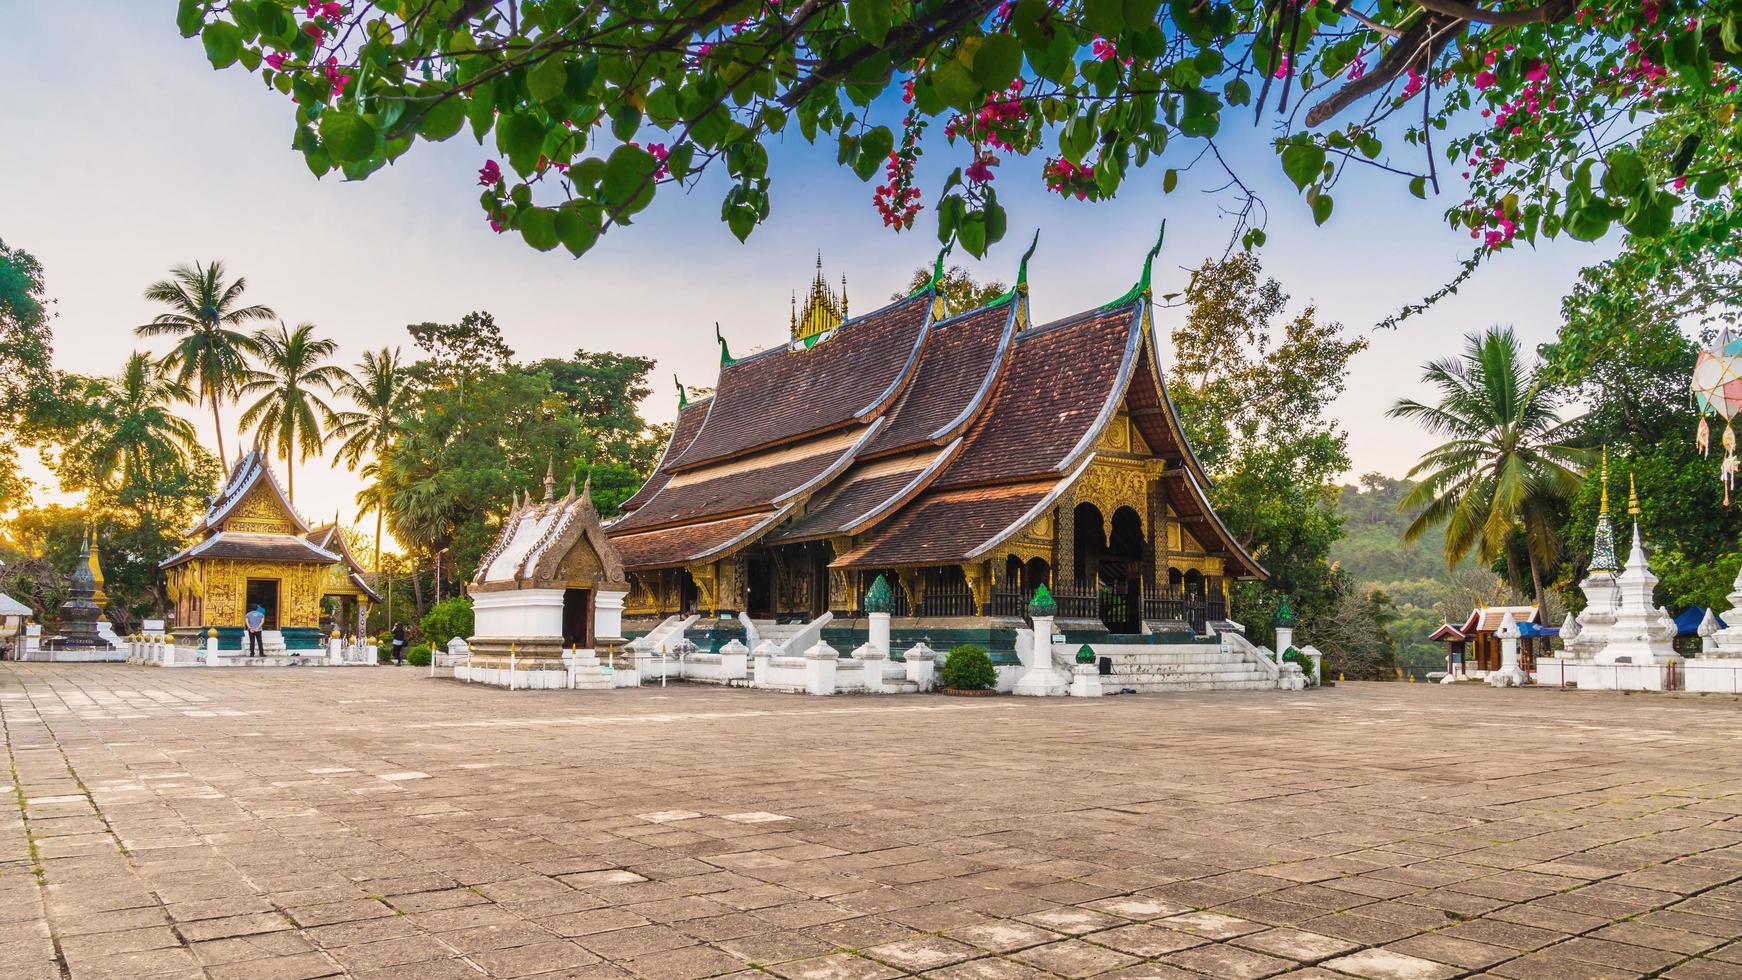 Wat Xieng Thong Golden City Temple in Luang Prabang, Laos. Xieng Thong temple is one of the most important of Lao monasteries. photo